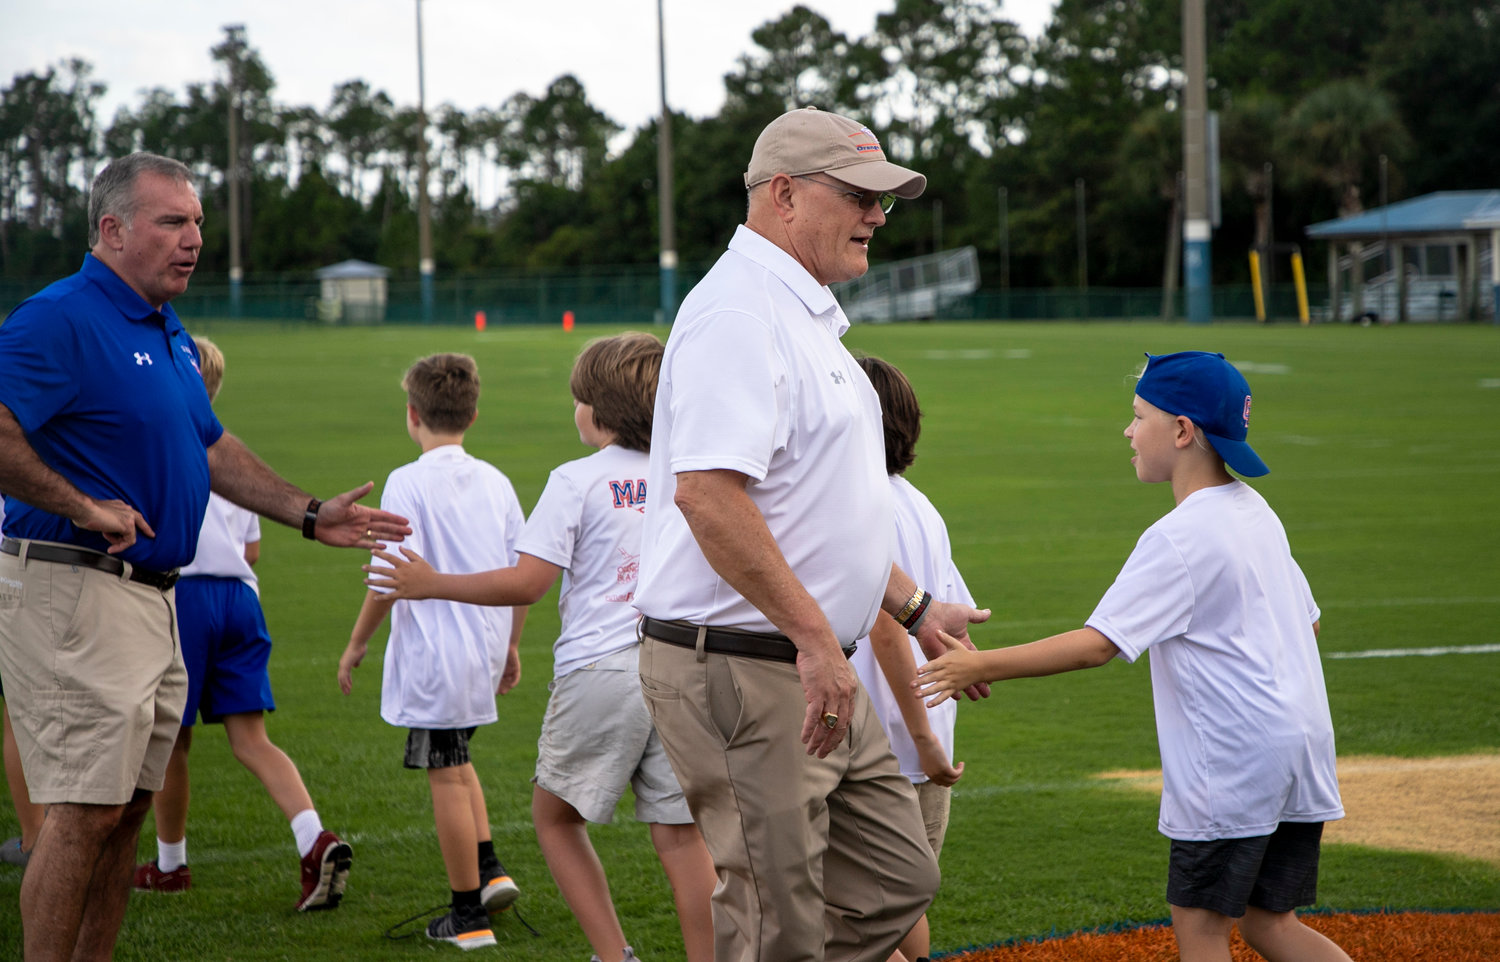 Orange Beach City School Board President Robert Stuart and Superintendent Randy Wilkes greet middle school football players as they were introduced to the community at last Friday’s Meet the Makos event at the Sportsplex.